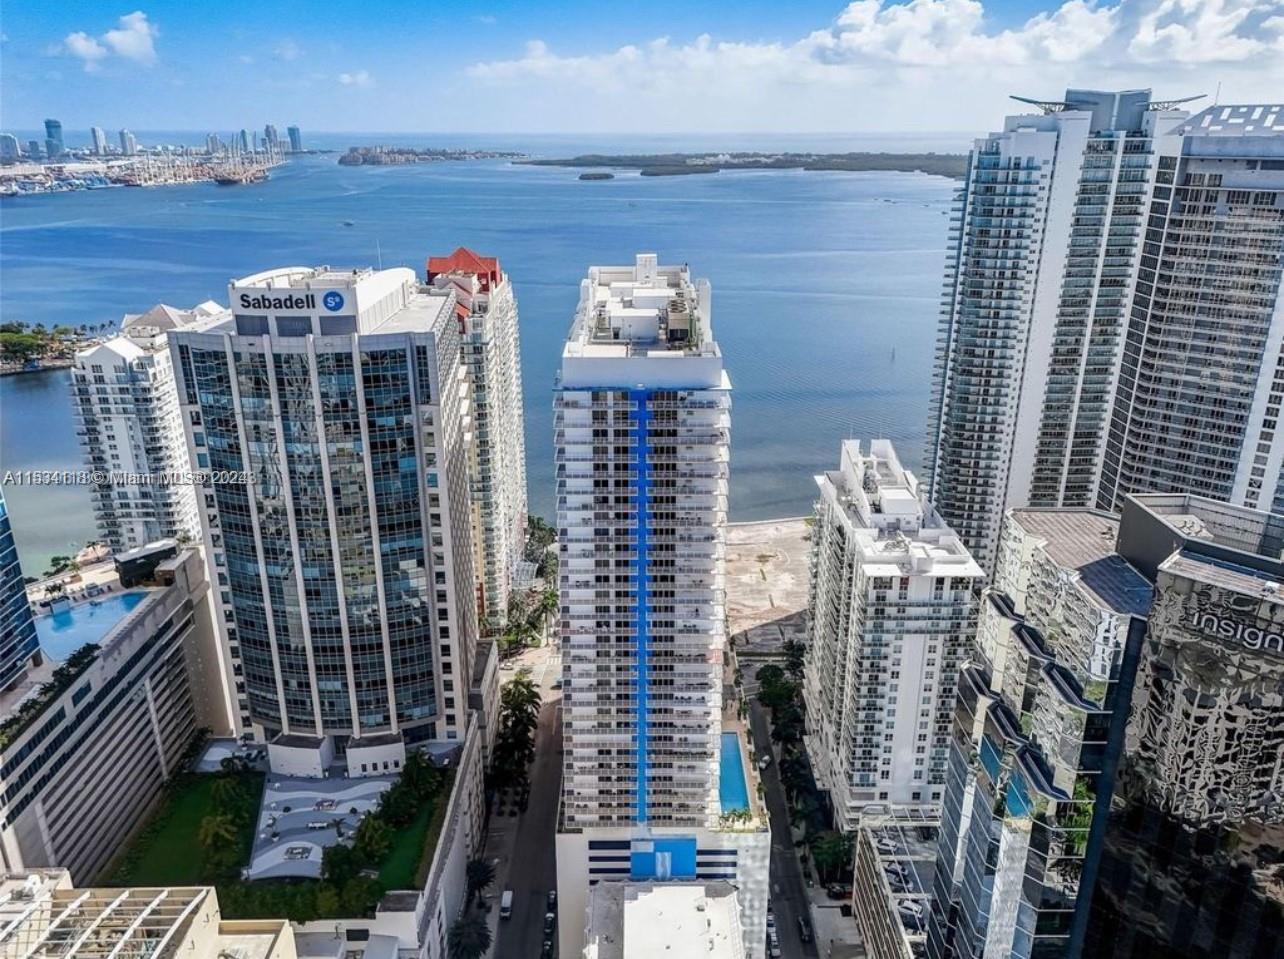 Live in the luxurious The Club at Brickell Bay Condominium. This spacious 1 bd condo offers amazing 